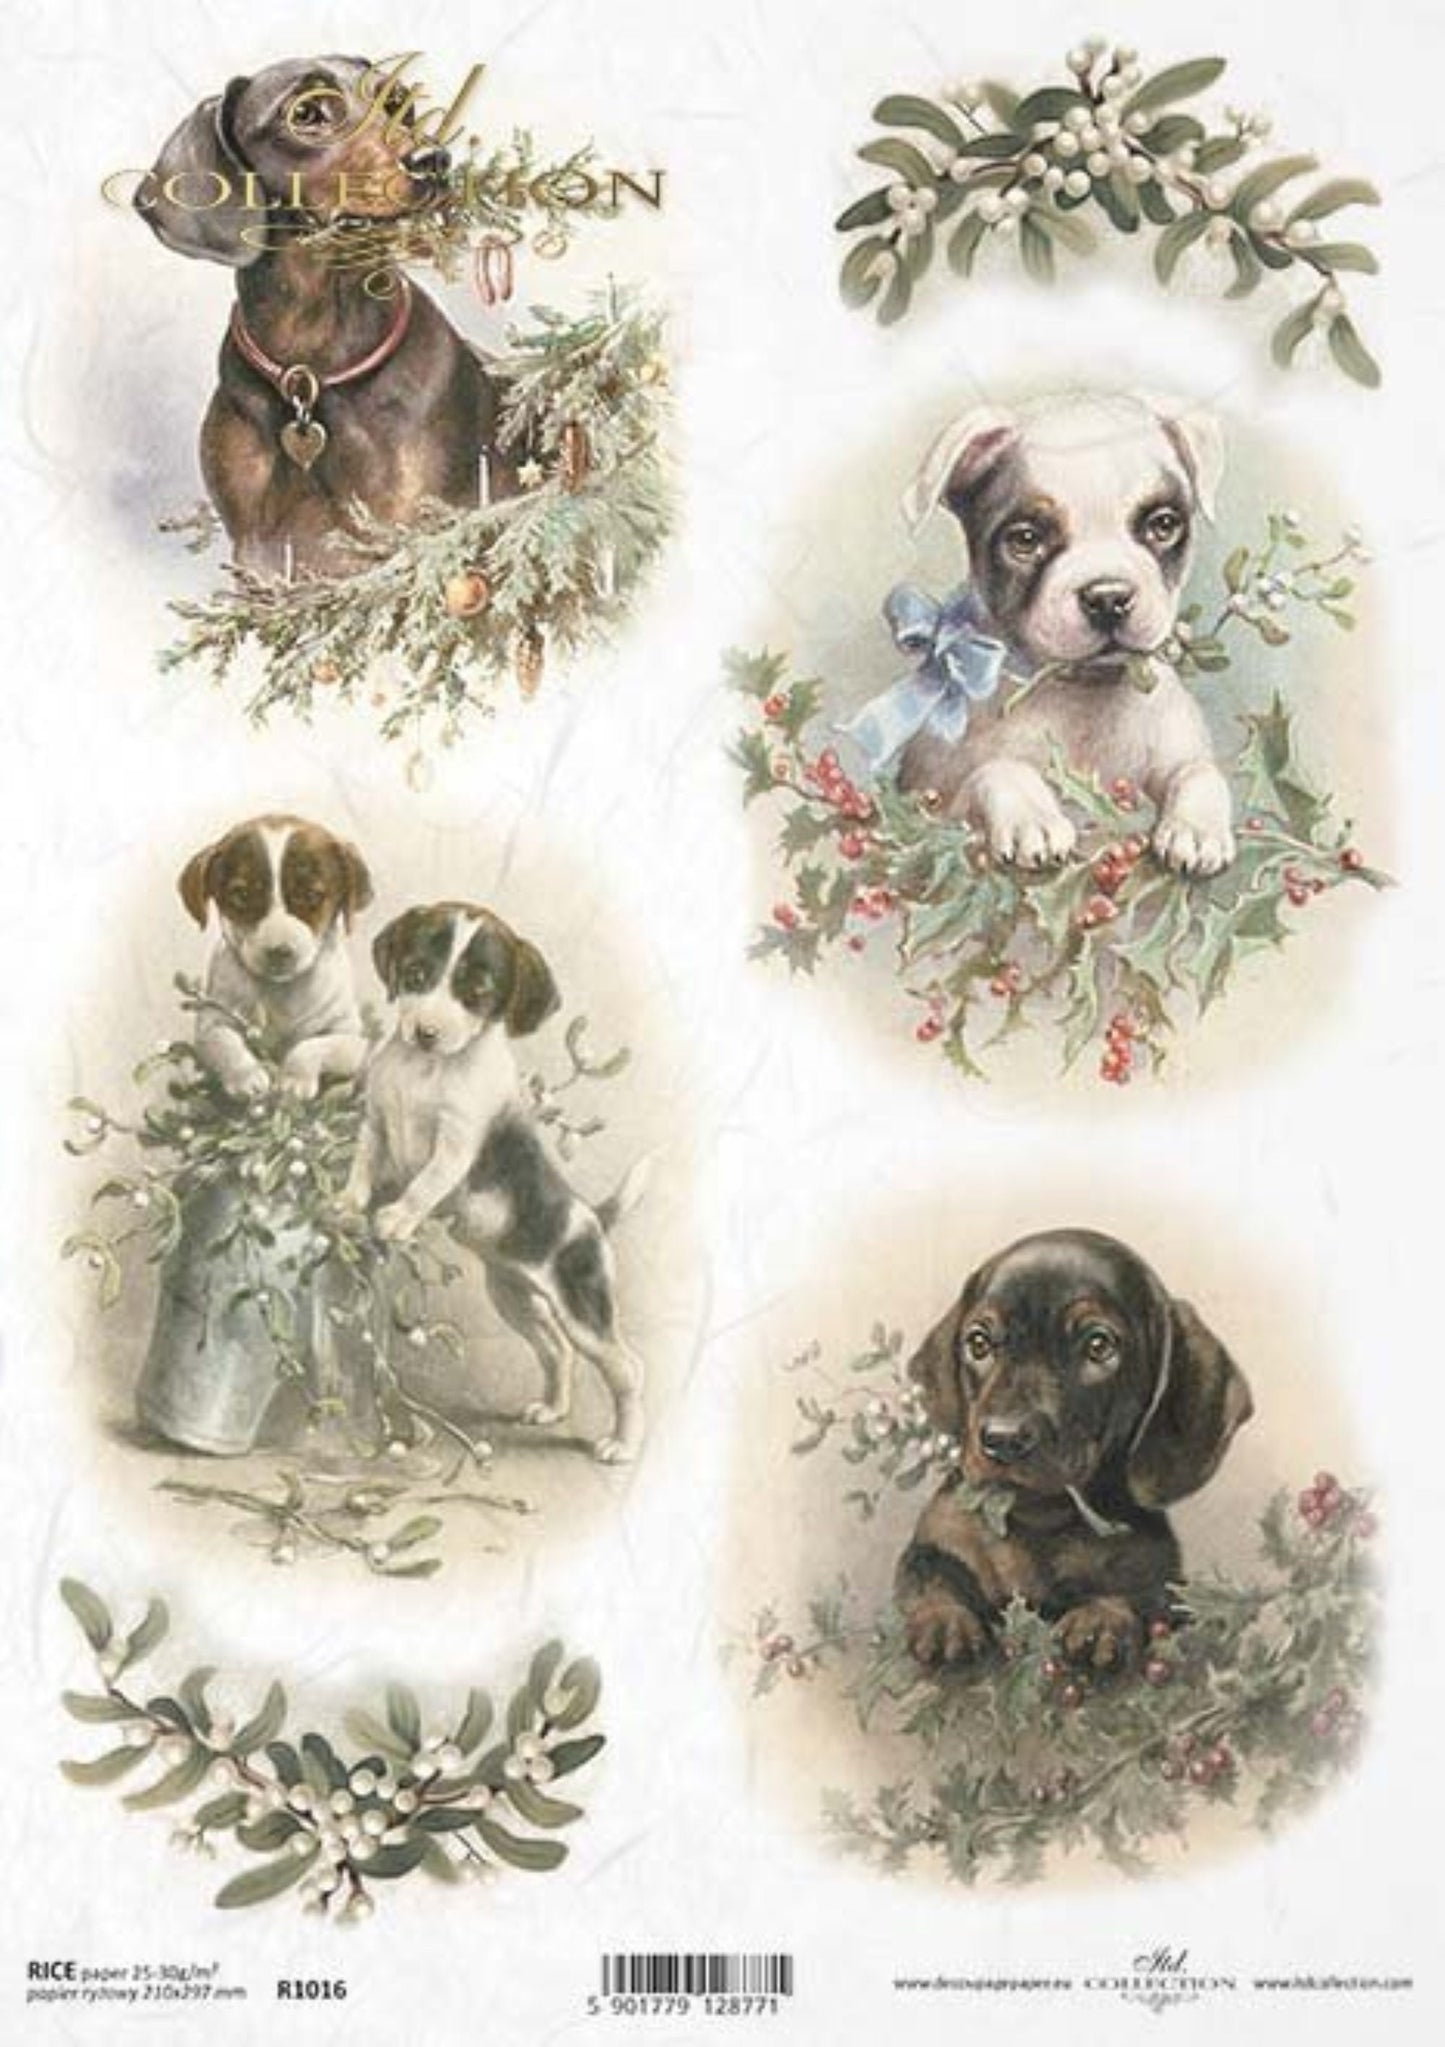 ITD Collection Rice Paper for Decoupage R1016, Size A4 - 210x297 mm, 8.27x11.7 inch, Vintage, Christmas Puppies, Rounds, Dogs